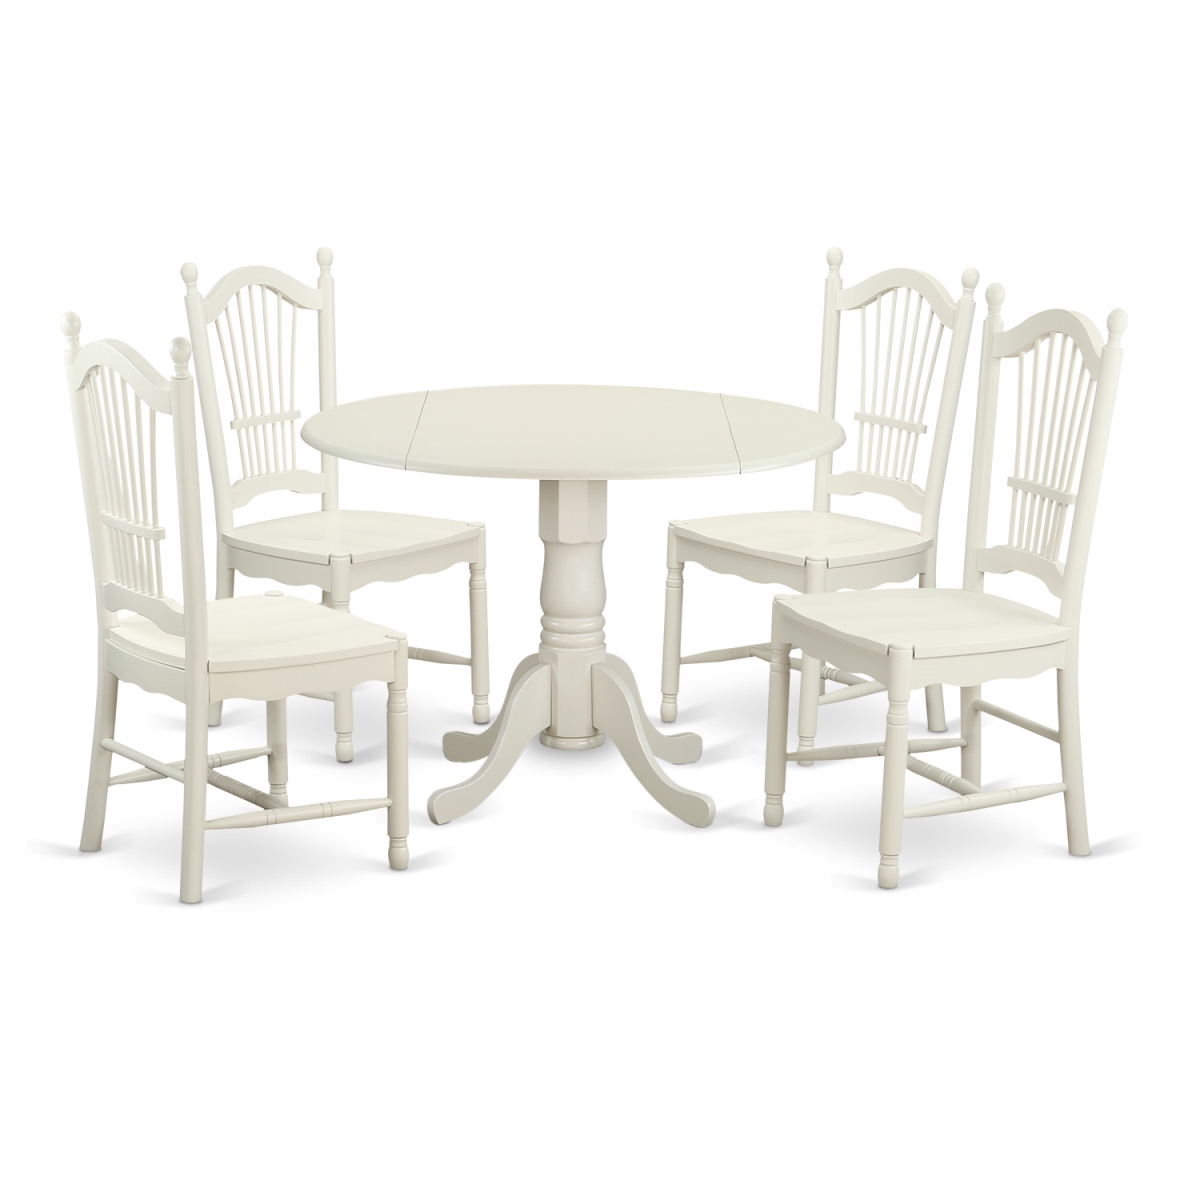 Picture of East West Furniture DLDO5-WHI-W Dining Set with 4 Table & 4 Chairs, Linen White - 5 Piece